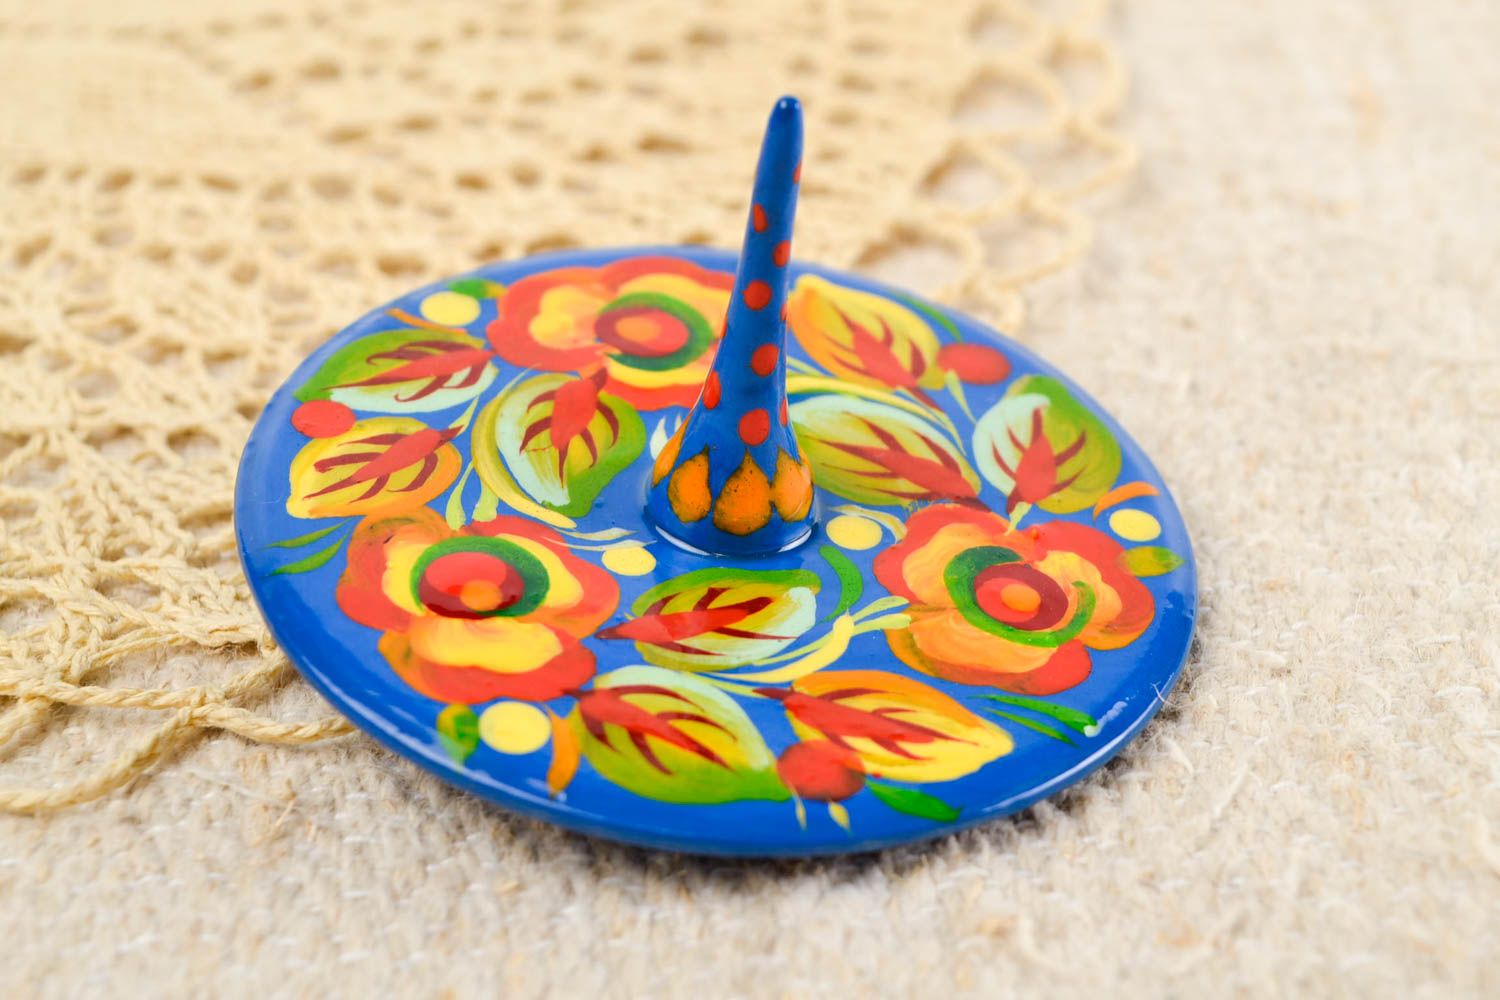 Beautiful handmade wooden toy spinning top spin top birthday gift ideas photo 1